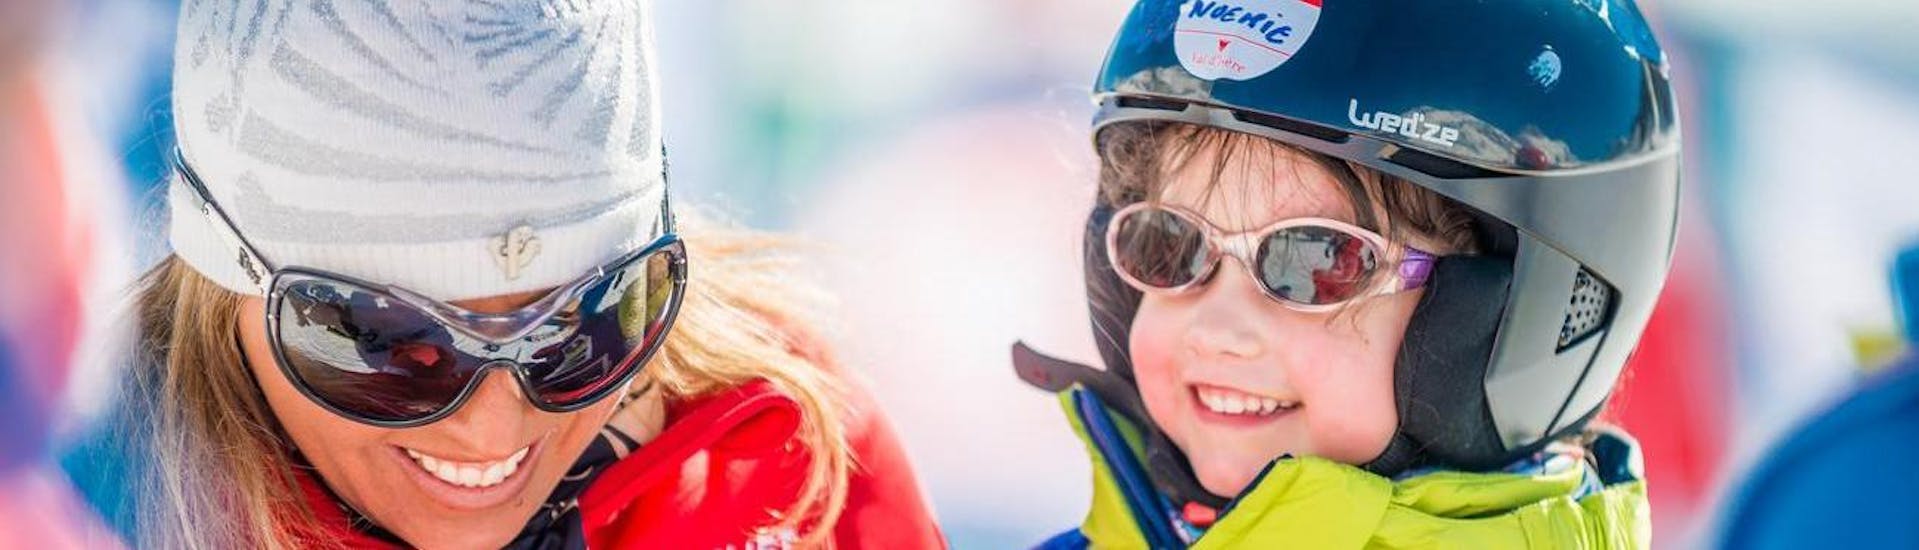 In the specially designed Kids Ski Lessons "Max 8" (5-12 years) - Advanced, a child is improving the skiing technique under the supervision of an instructor from ESF Val d'Isère.